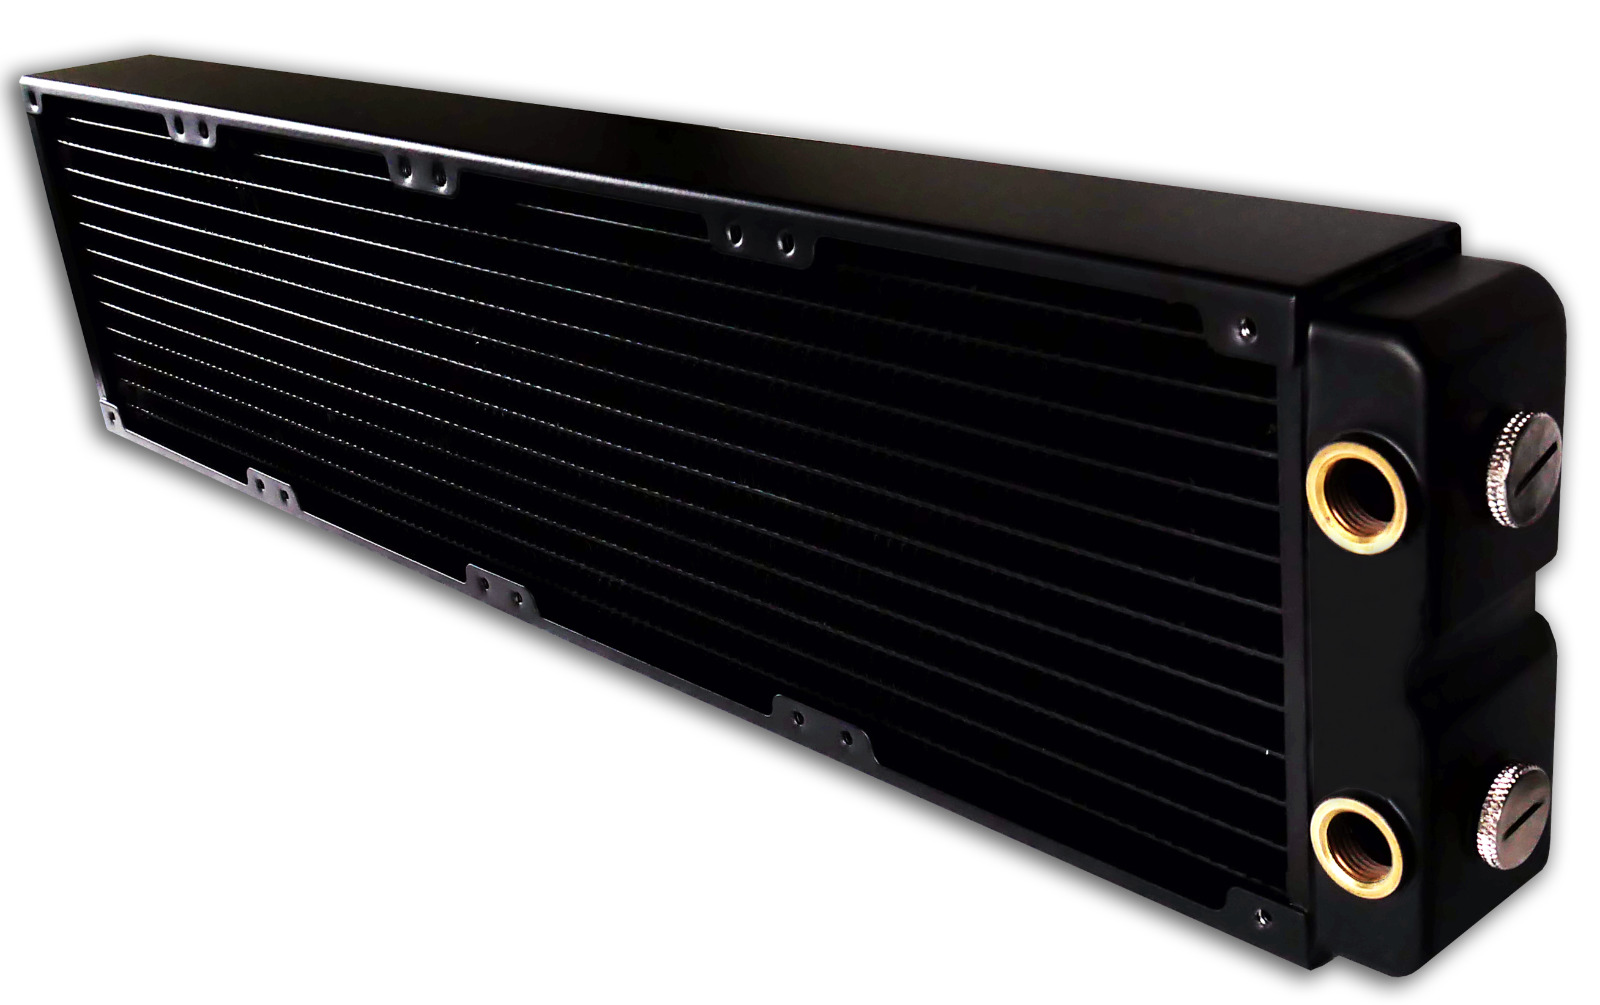 EMCOOL 480 mm Multi-Port Copper Radiator for Performance Liquid Cooling Systems